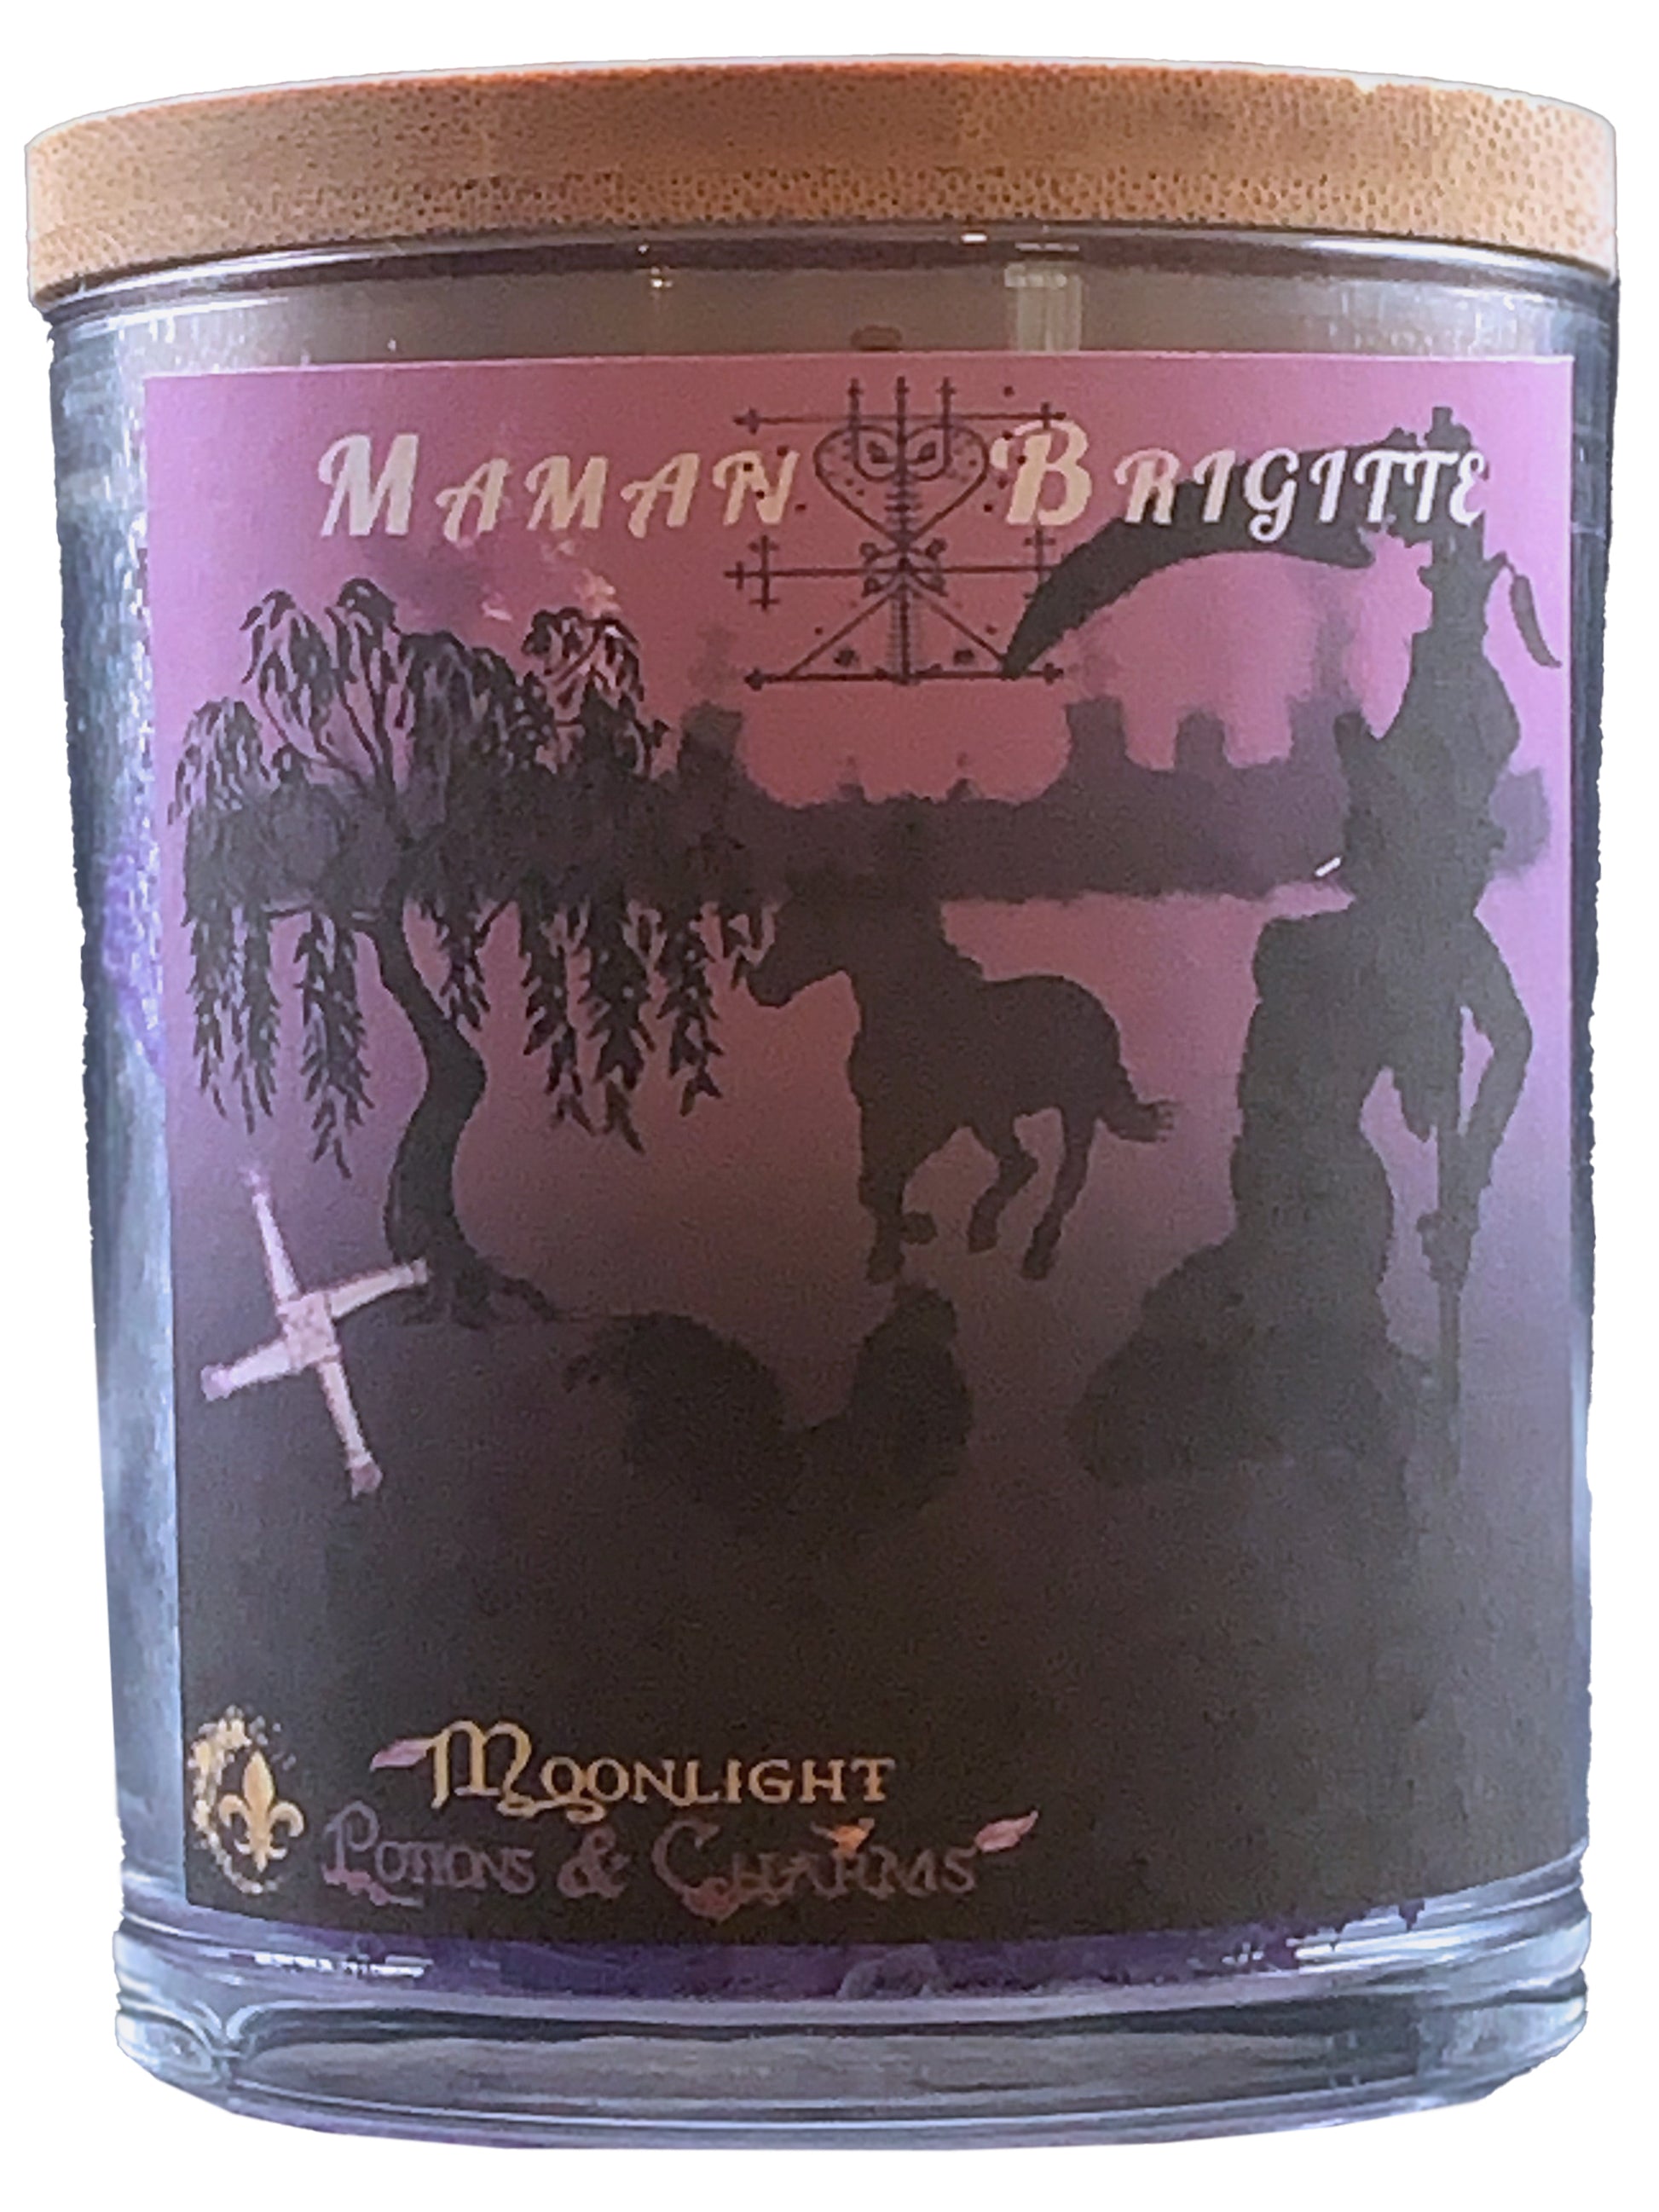 Maman Brigitte Prayer Candle, Front - Moonlight Potions & Charms